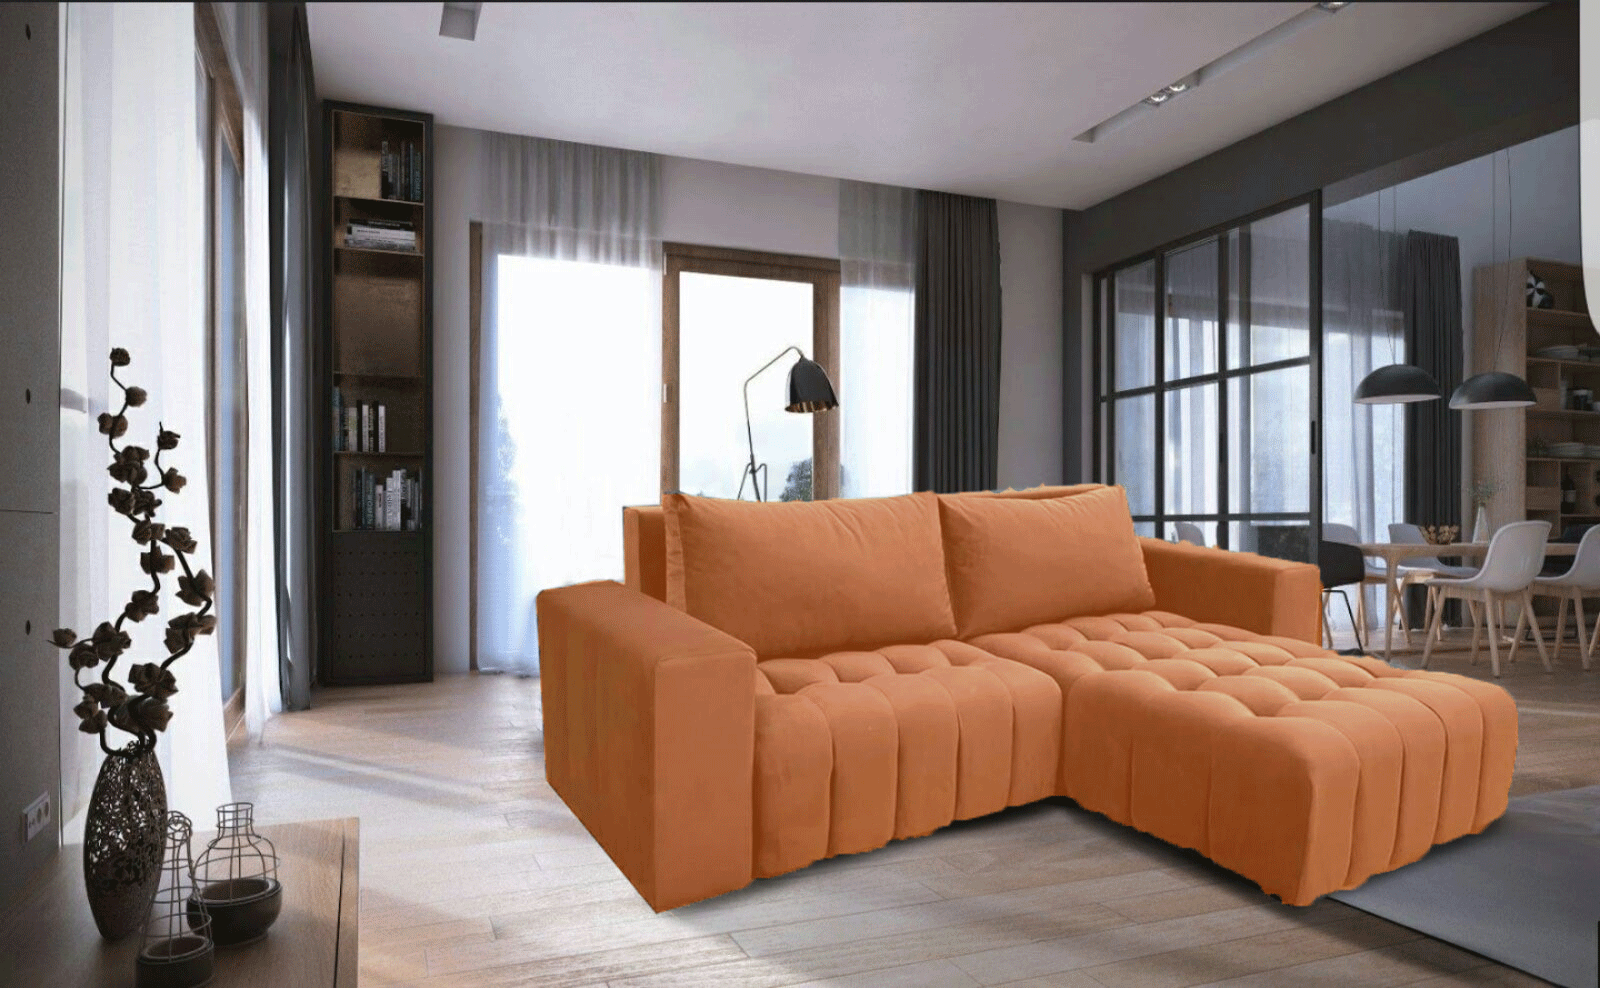 Living Room Furniture Sleepers Sofas Loveseats and Chairs Neo sofa bed w/ storage Orange